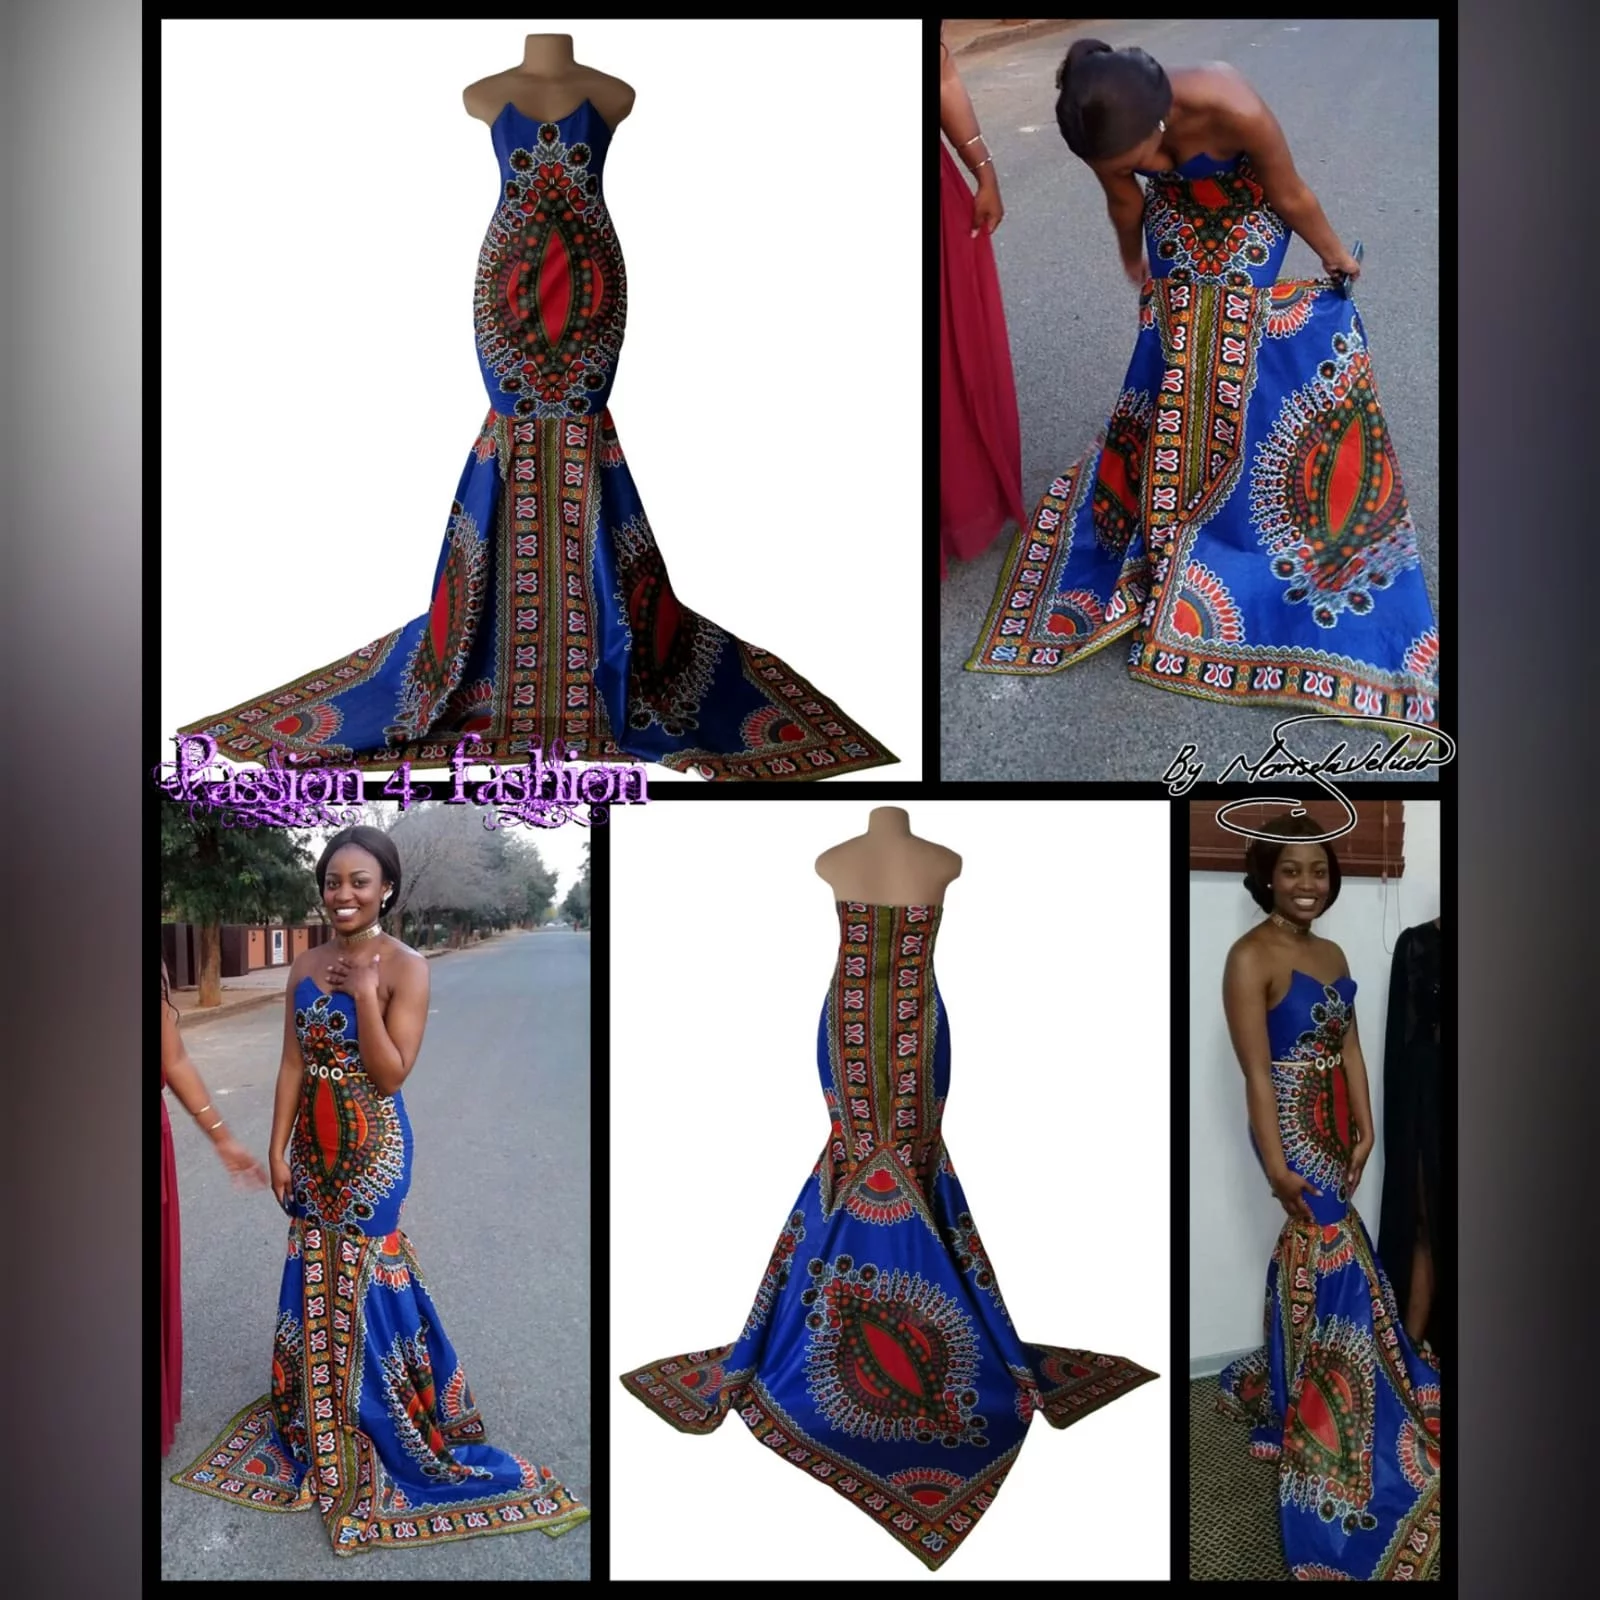 Soft mermaid formal printed dress 6 soft mermaid formal printed dress was worn for a special occasion. This mermaid dress is made with a traditional dashiki print, with a 3 point train.